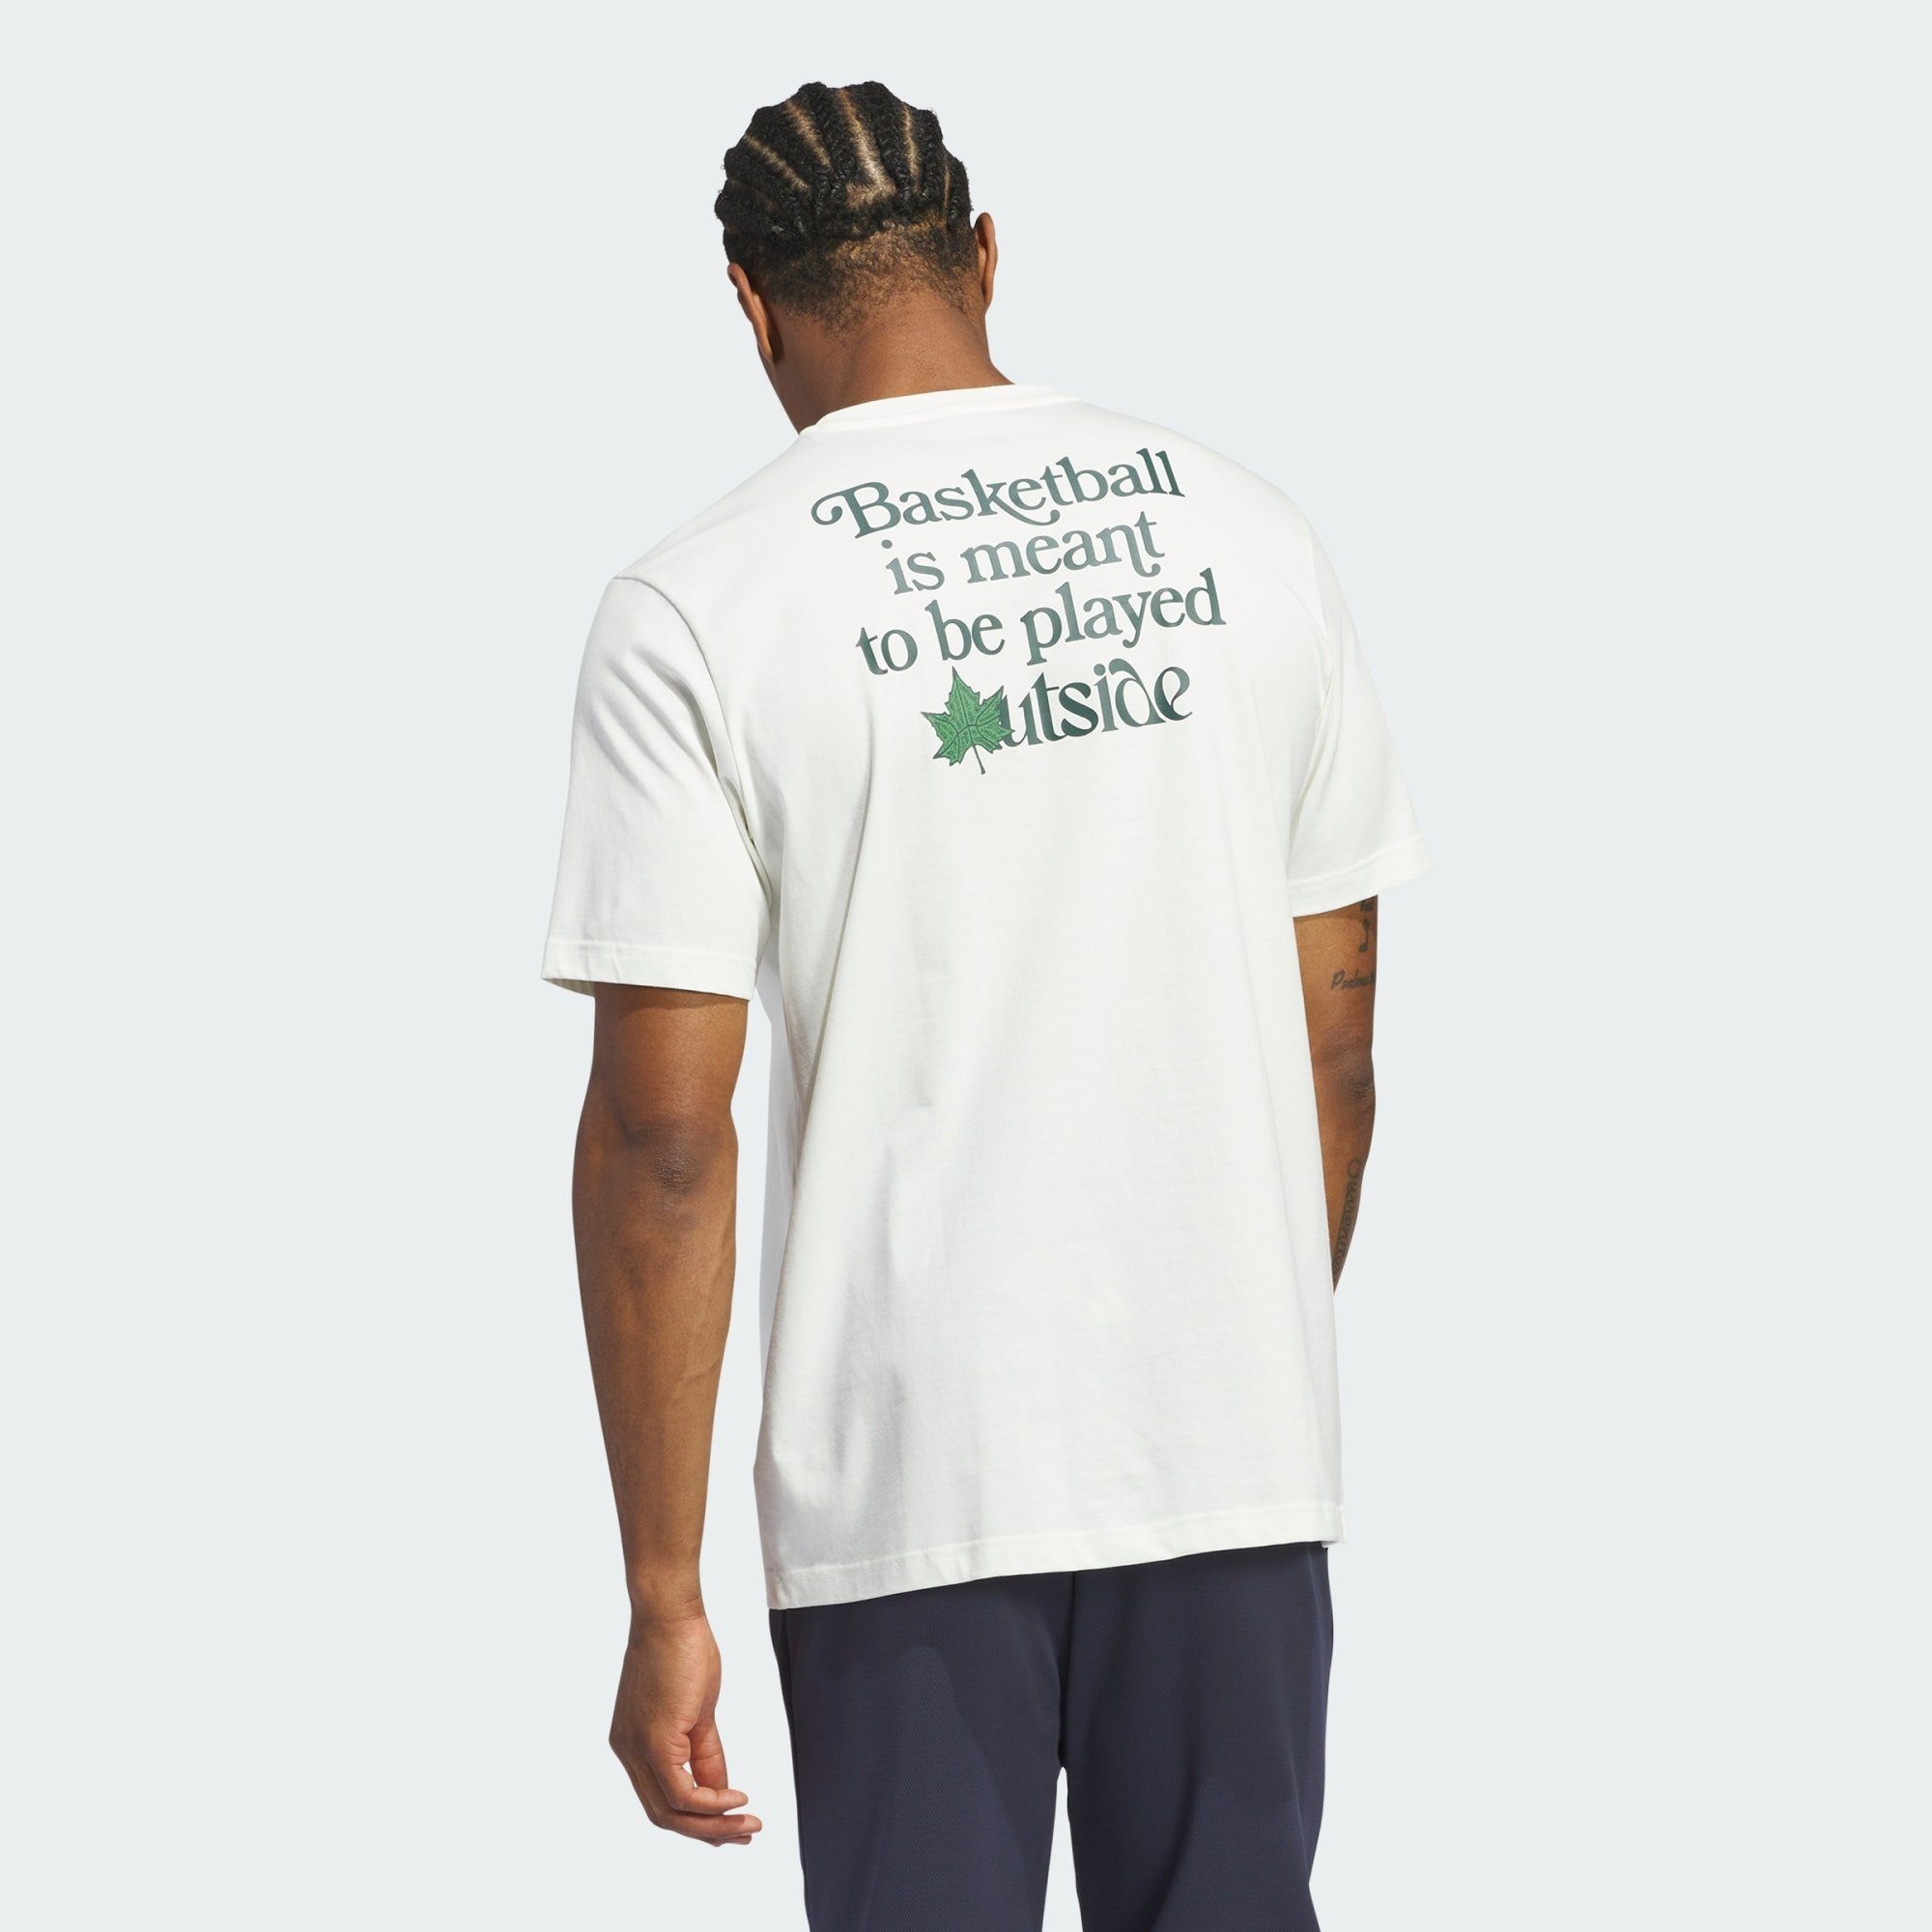 COURT adidas GRAPHIC Funktionsshirt T-SHIRT Performance THERAPY